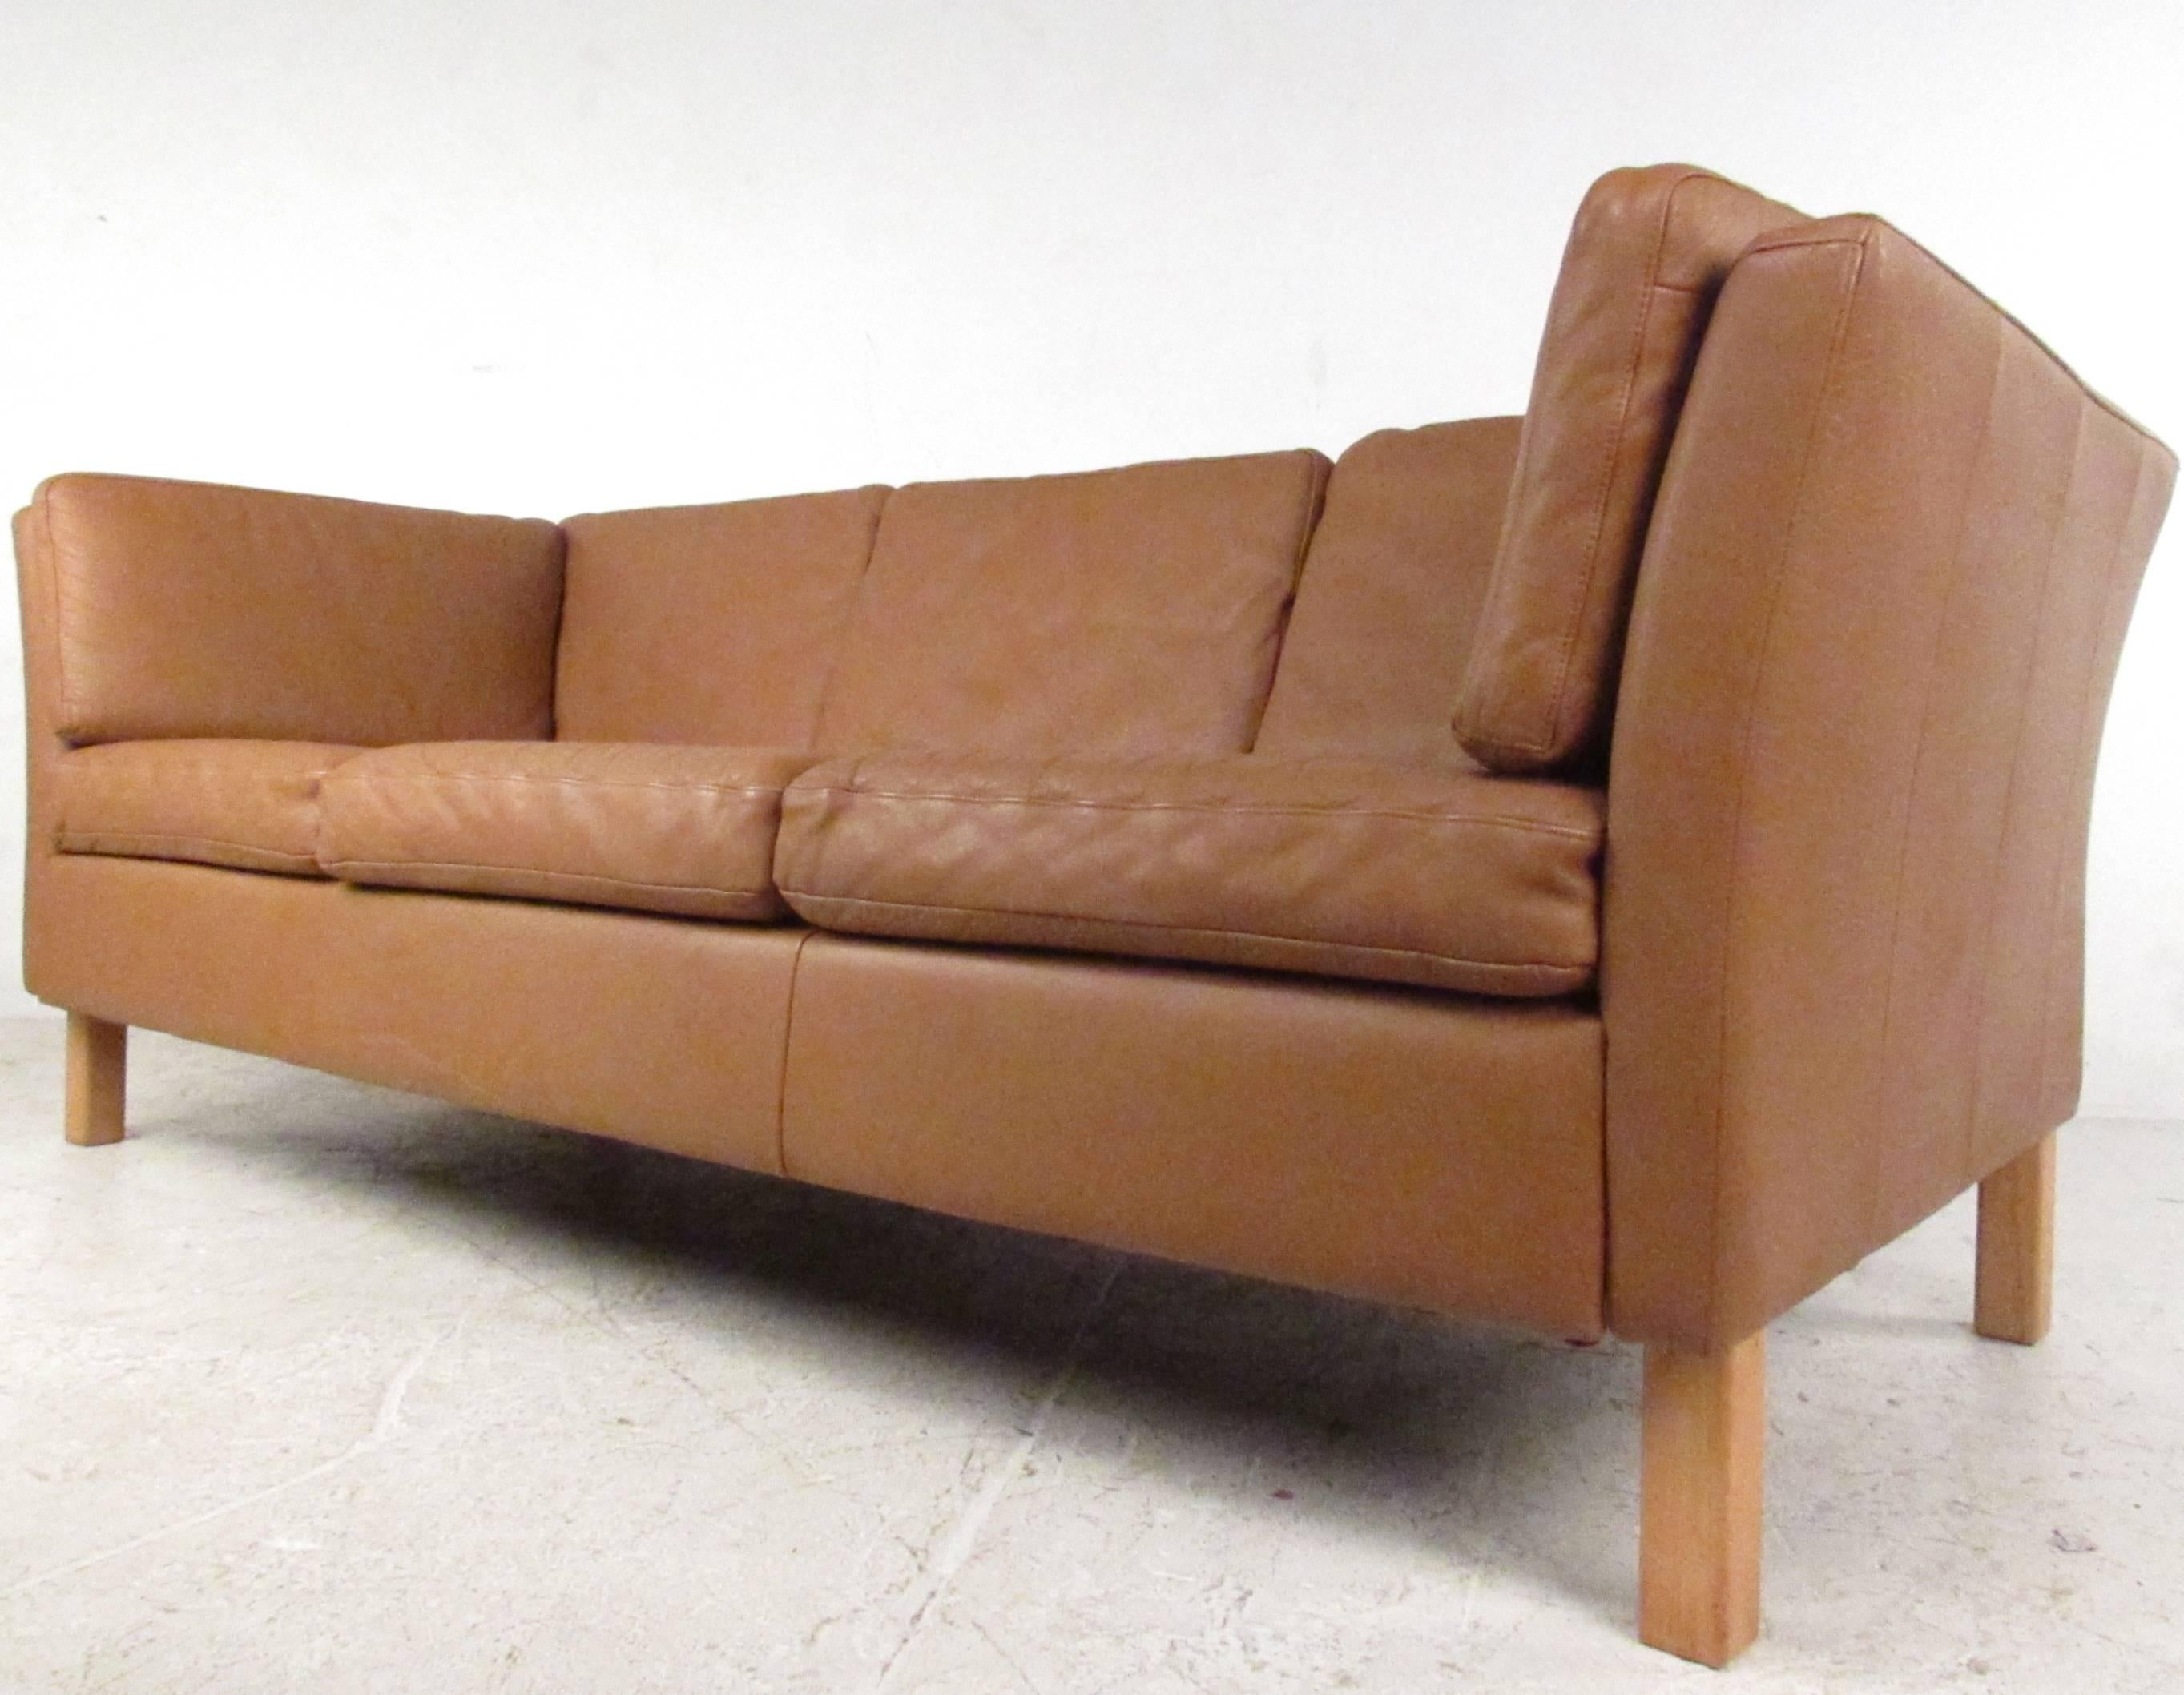 This classic Mid-Century leather three-seat sofa features the simple modern lines Scandinavian Modern design is so well known from. Danish modern design and comfortable upholstery make this a stylish seating option for home, office, or business use.